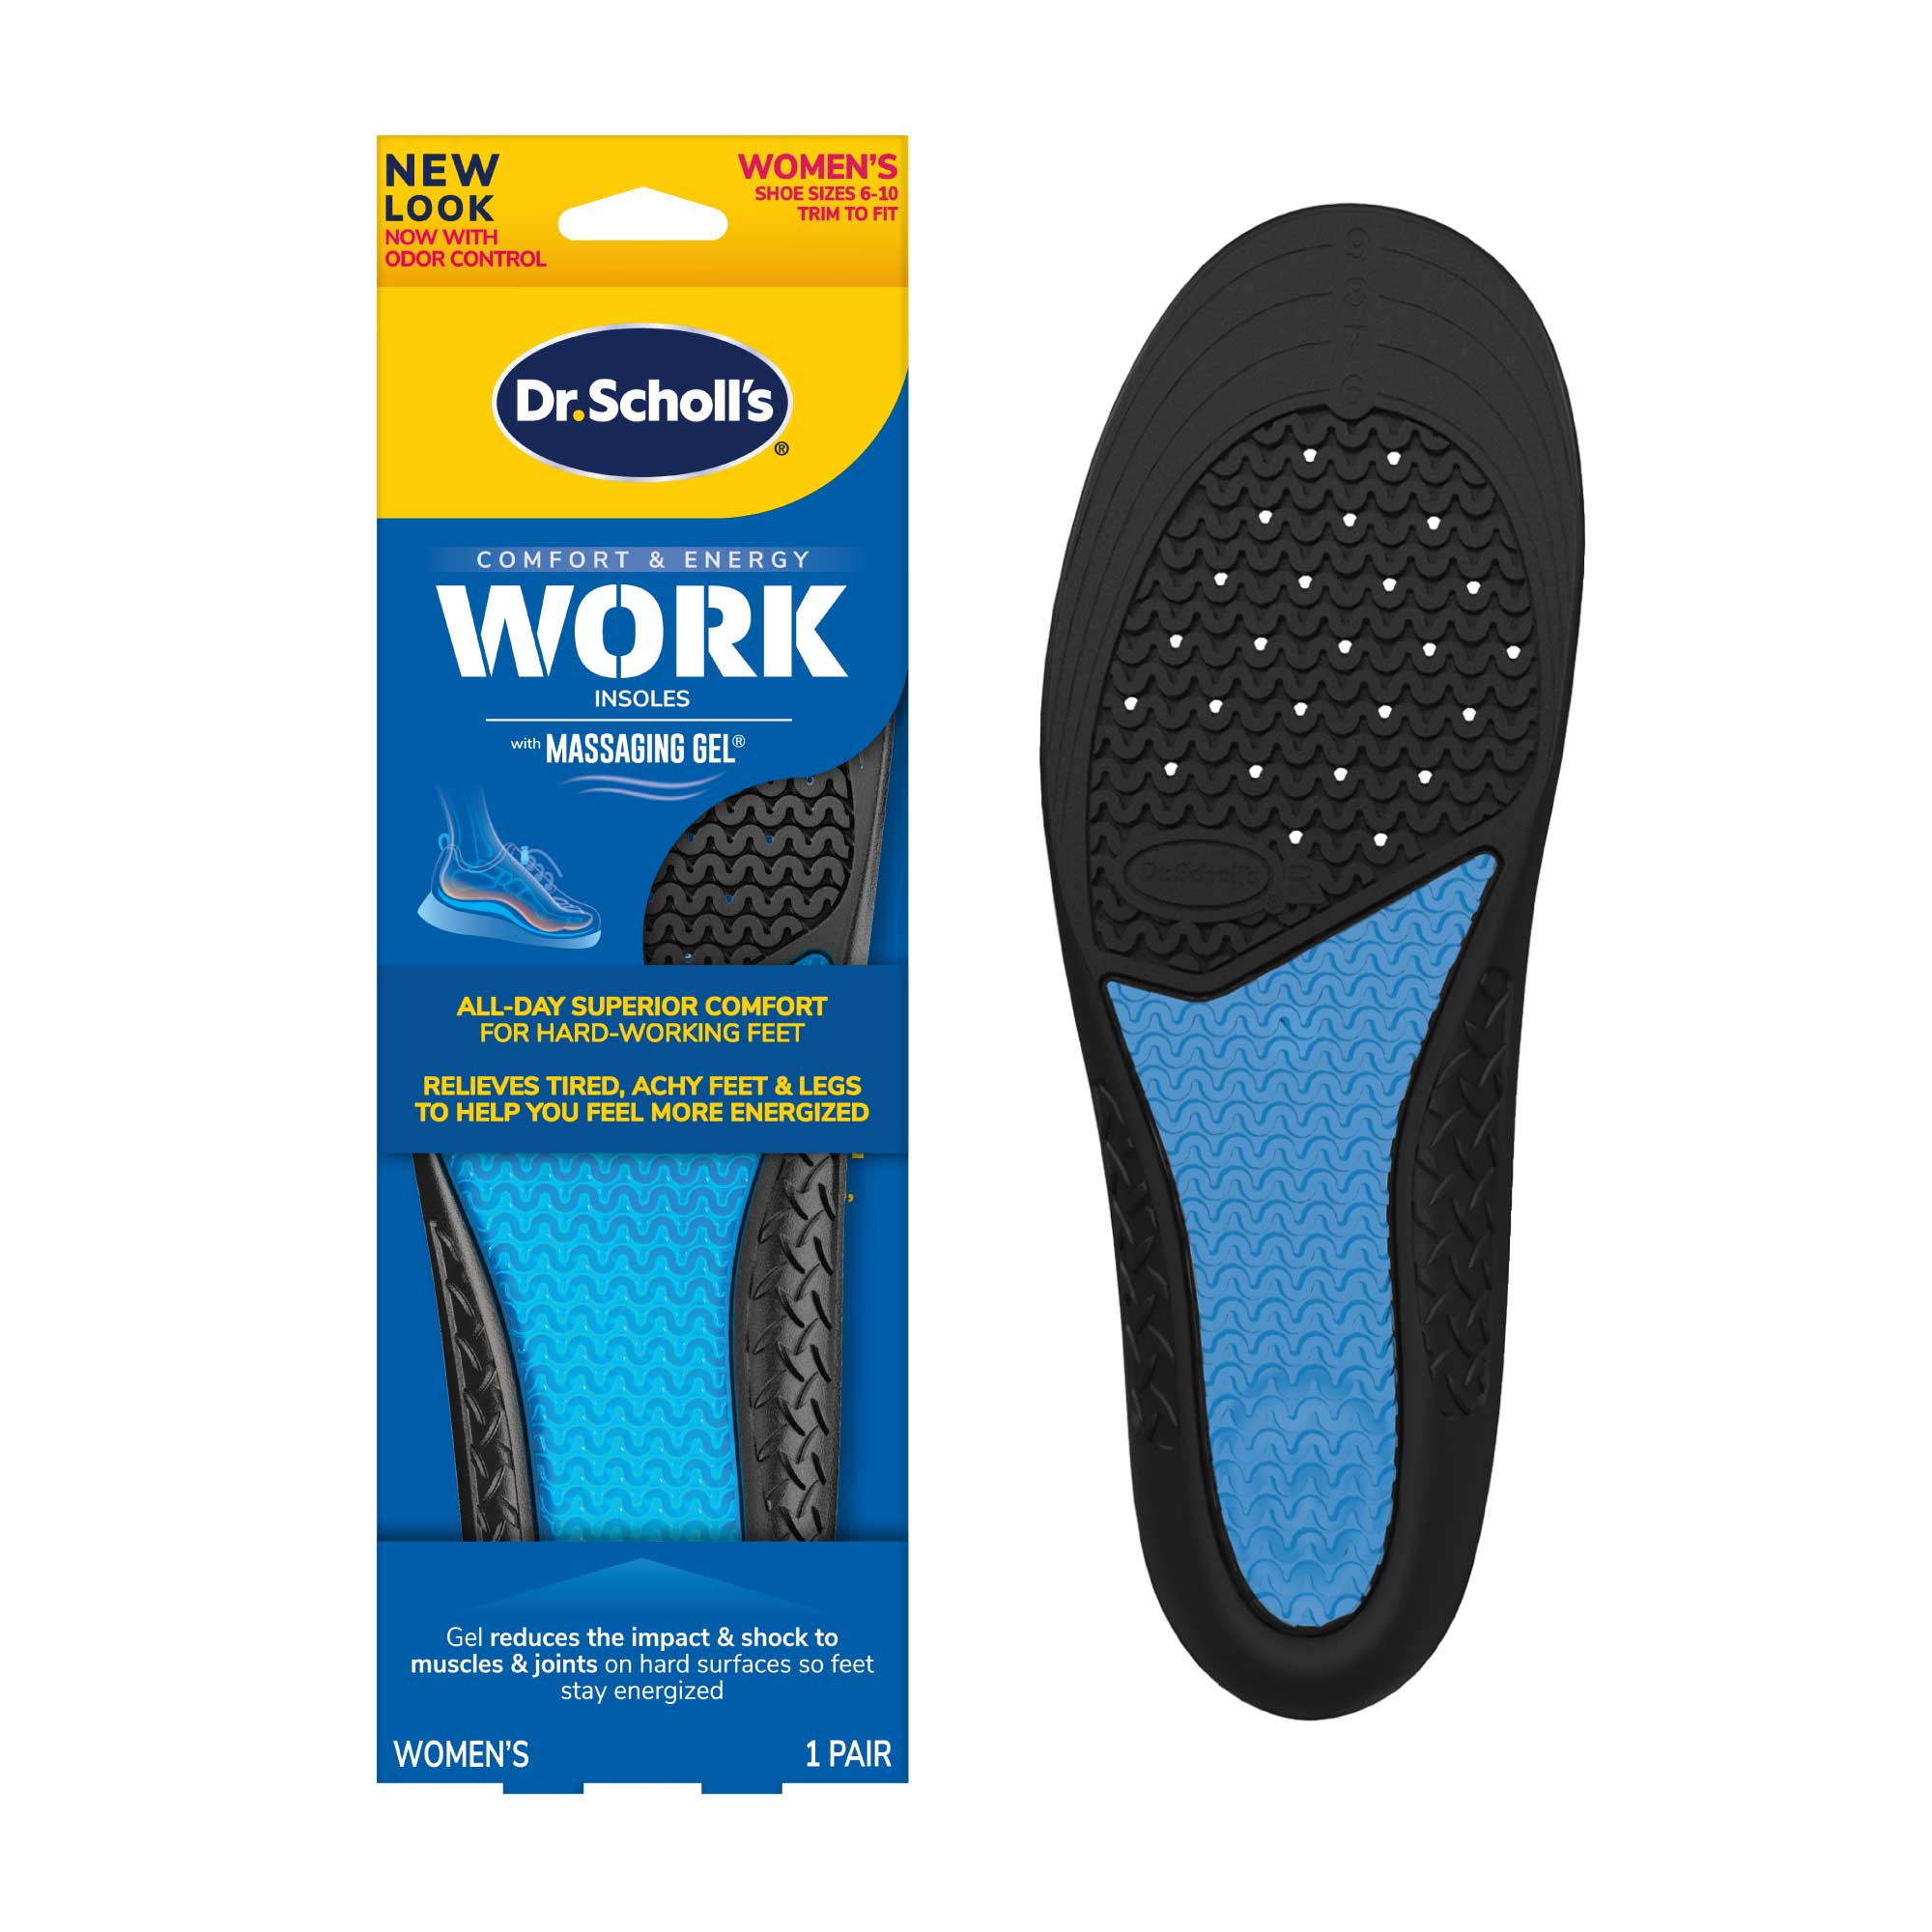 Dr. Scholl's Women's Comfort and Energy Work Insoles, Size 6-10